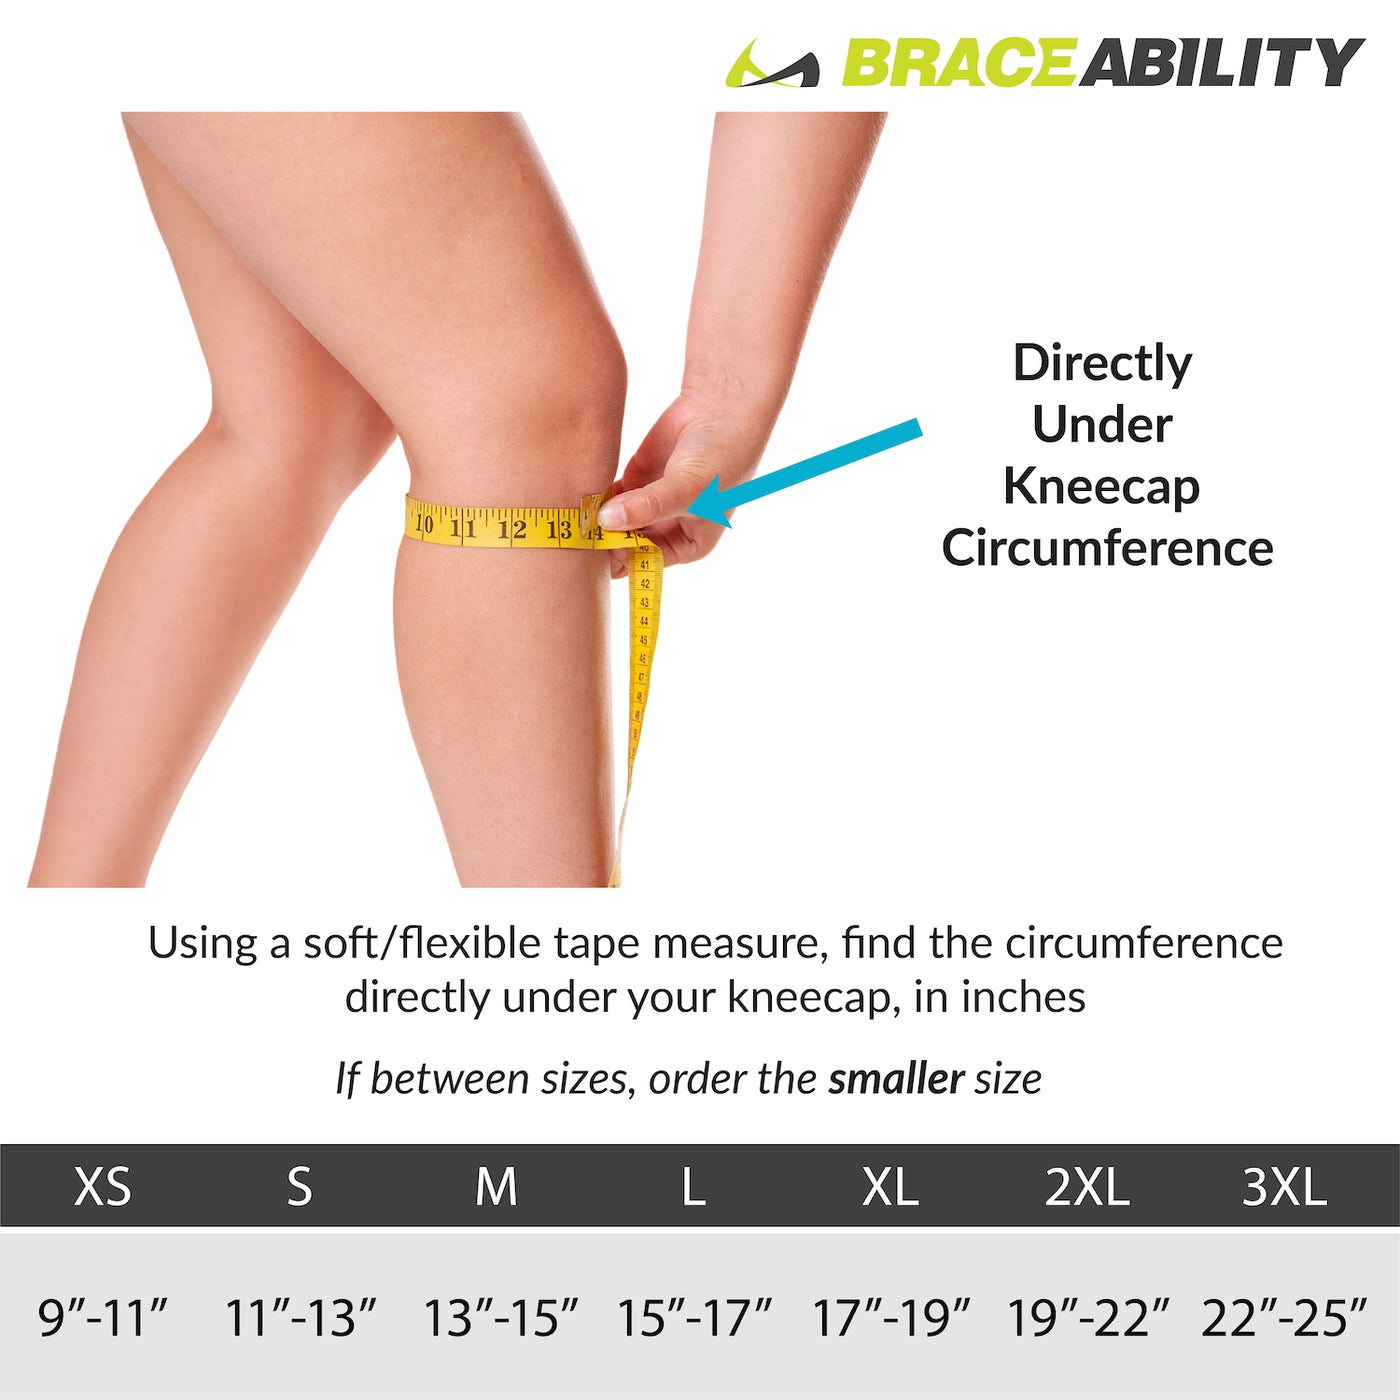 Sizing chart for Patellar Tendon Adjustable knee strap. Available in sizes XS-3XL.